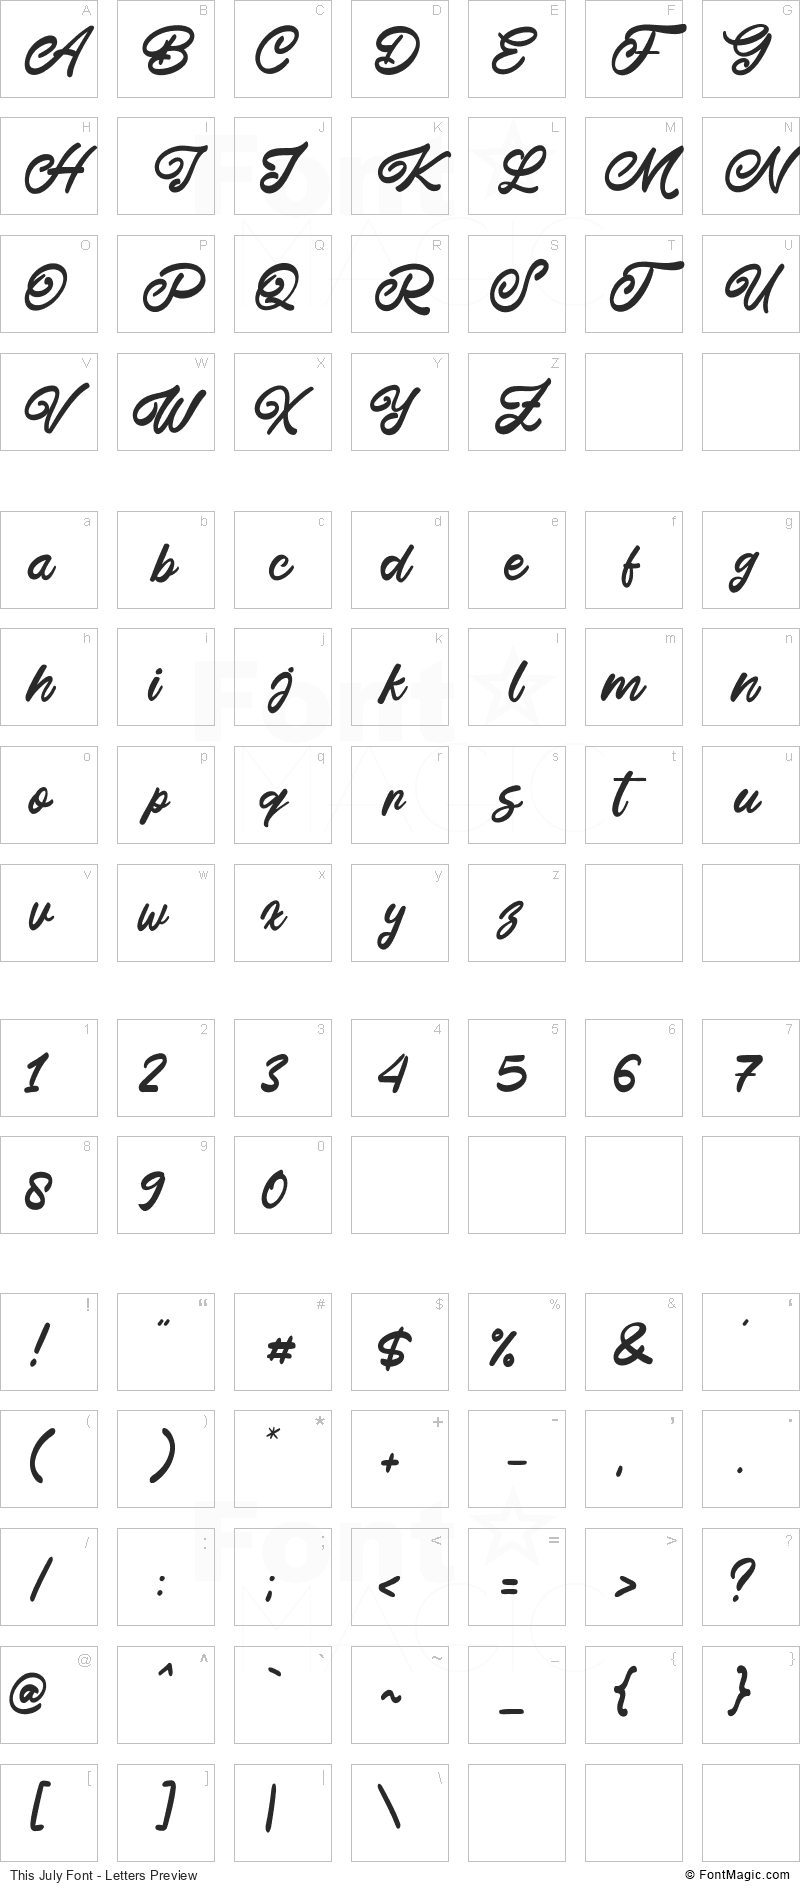 This July Font - All Latters Preview Chart